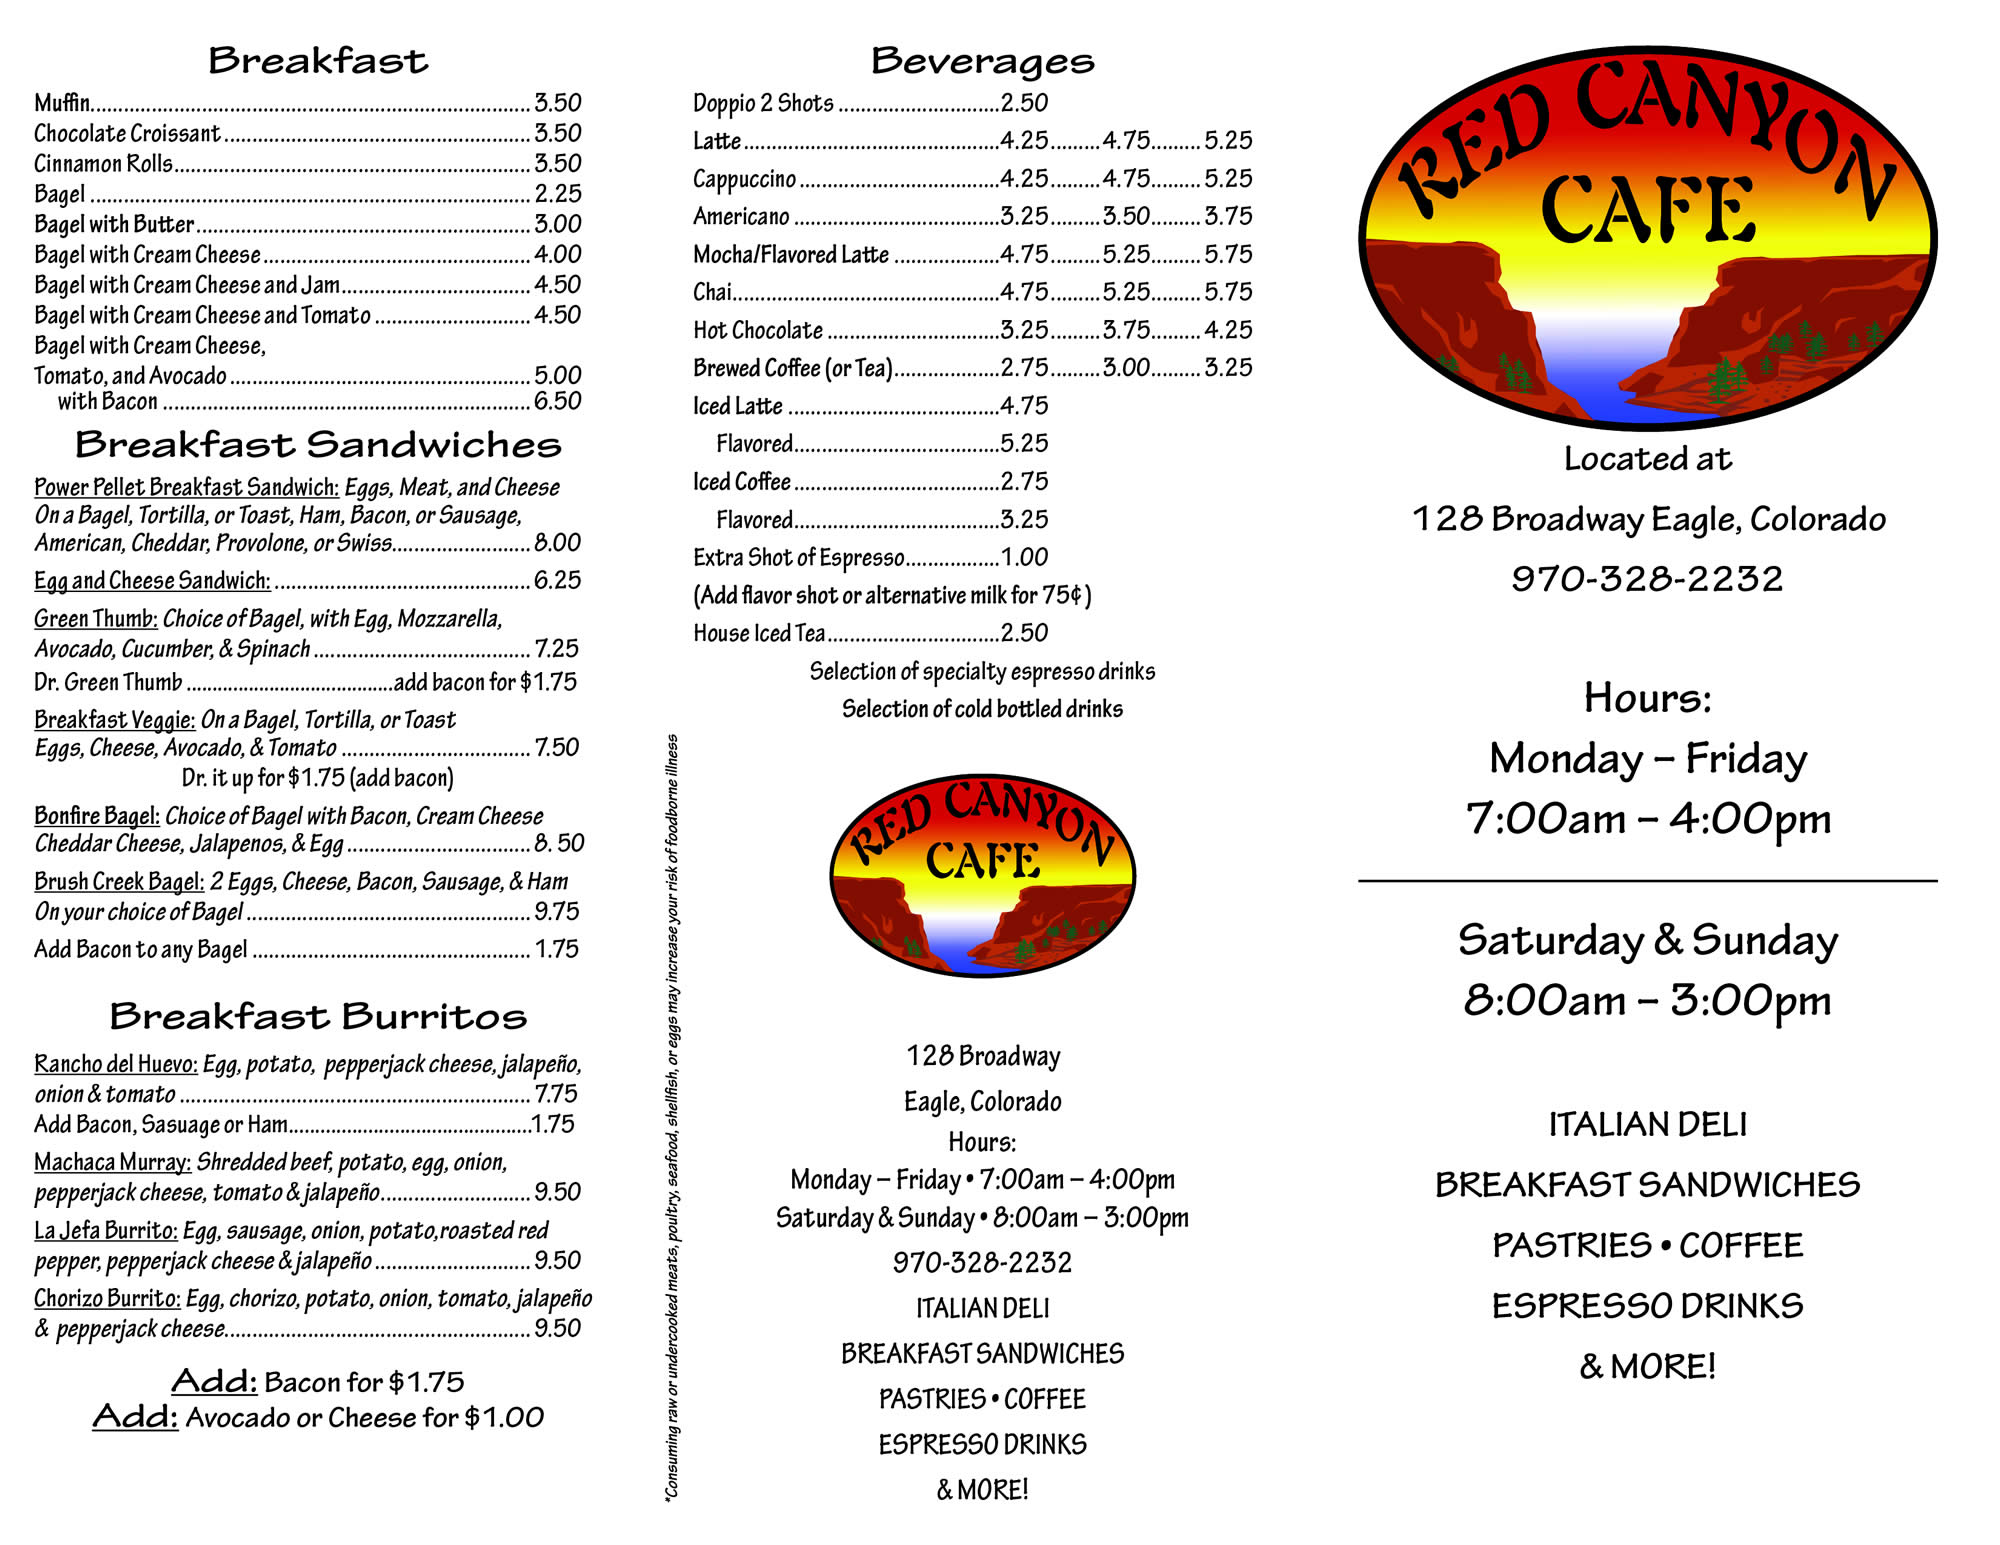 Red Cafe | Eagle, Colorado Breakfast & Lunch